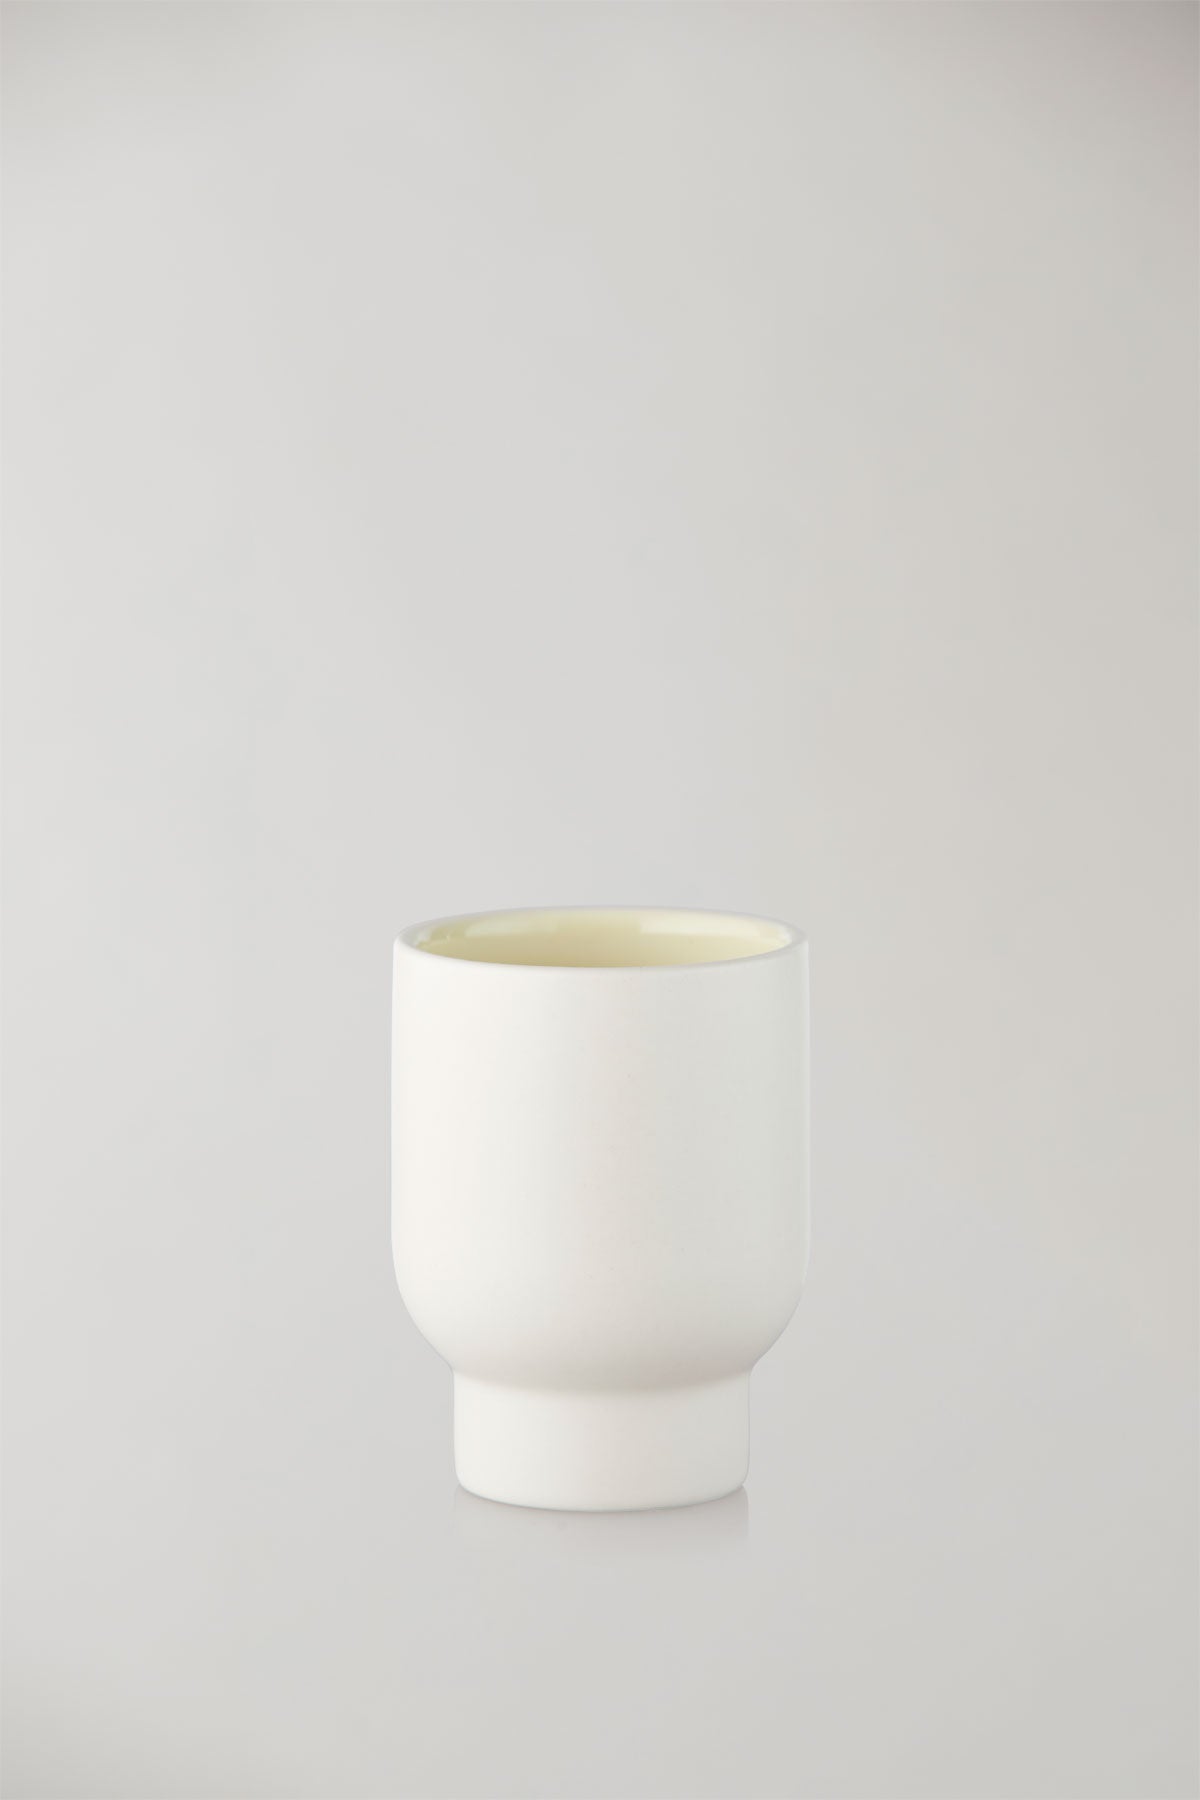 CLAYWARE, CUP, TALL, 2 PCS, IVORY/YELLOW